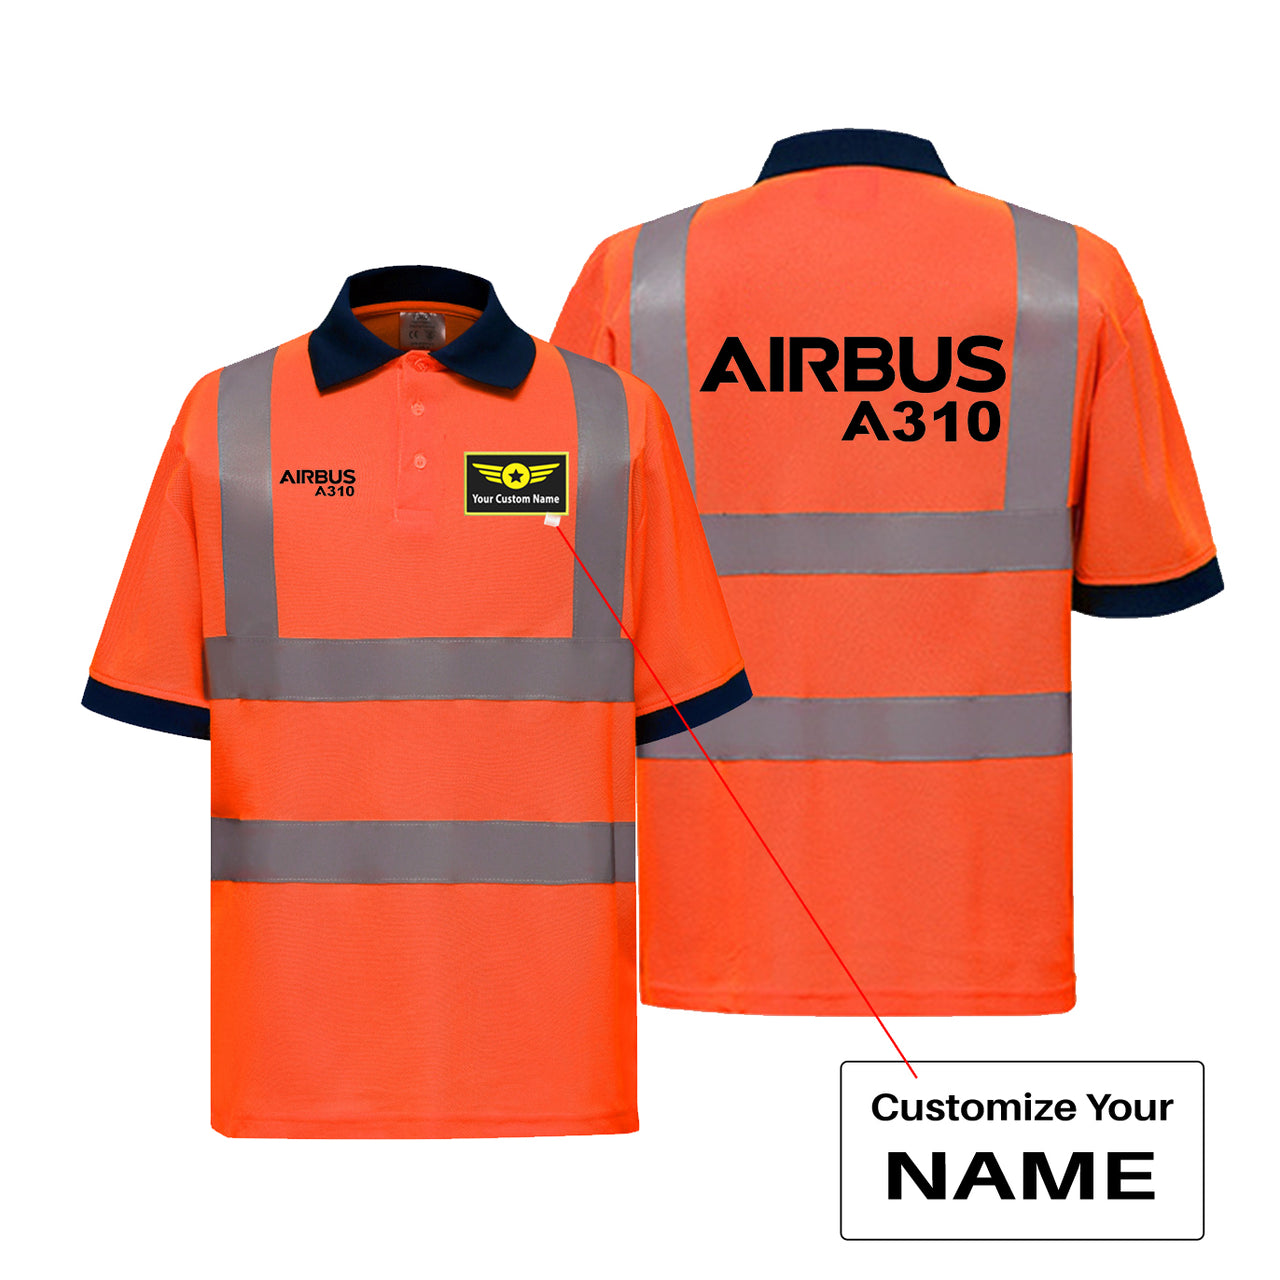 Airbus A310 & Text Designed Reflective Polo T-Shirts